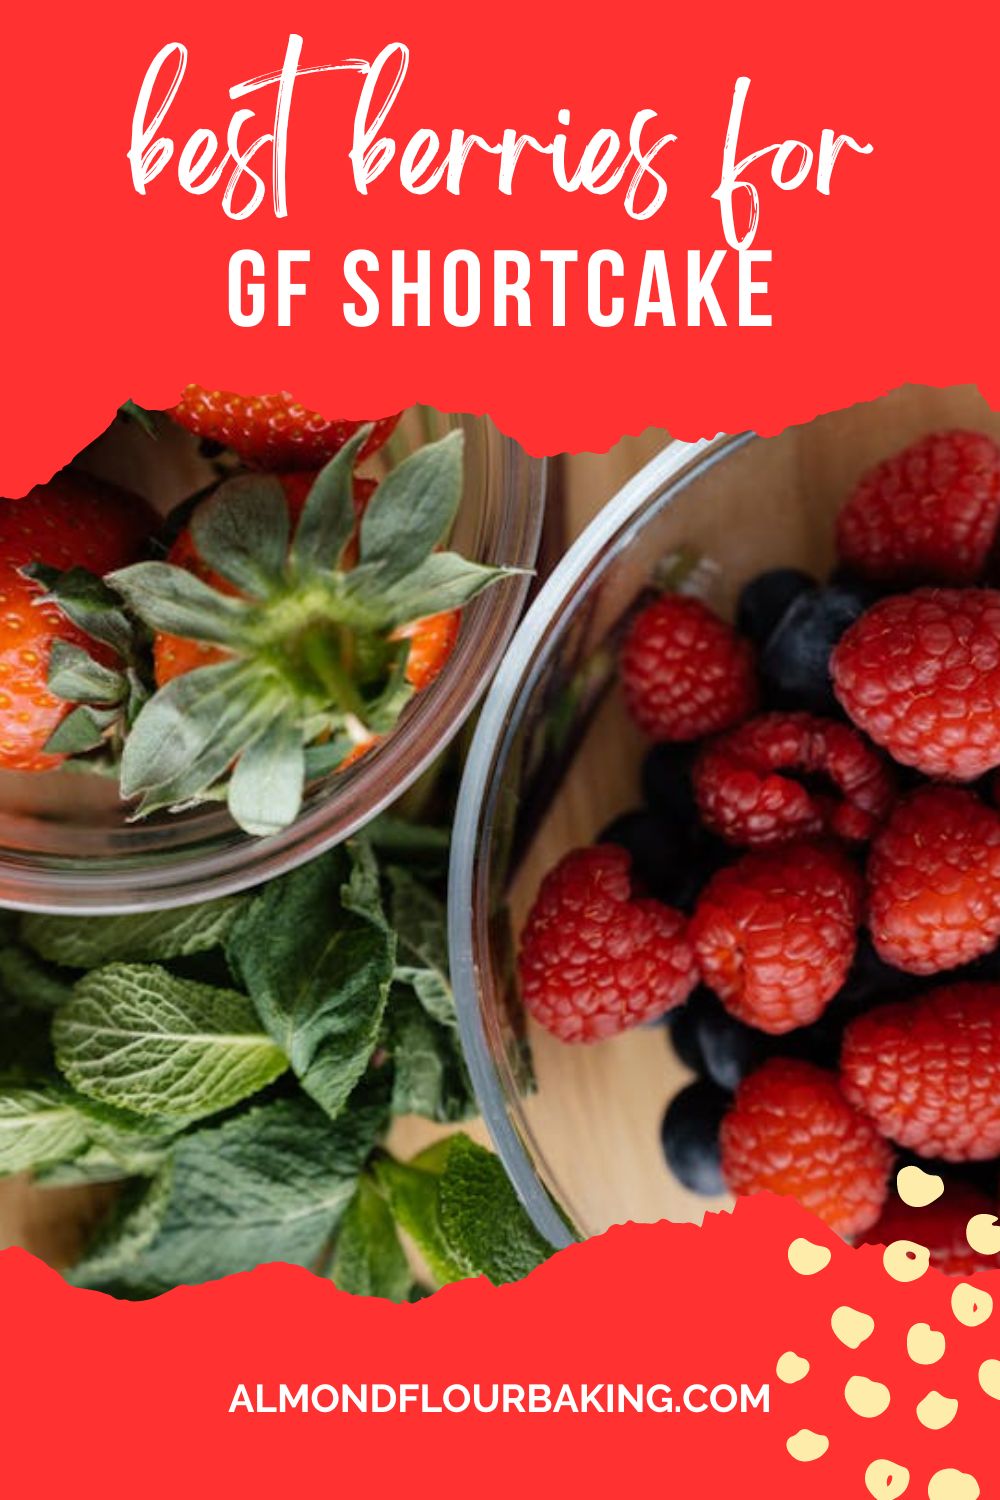 Wondering about the best berries for shortcake? Check out these summer berry options to pair with your gluten free almond flour biscuits.